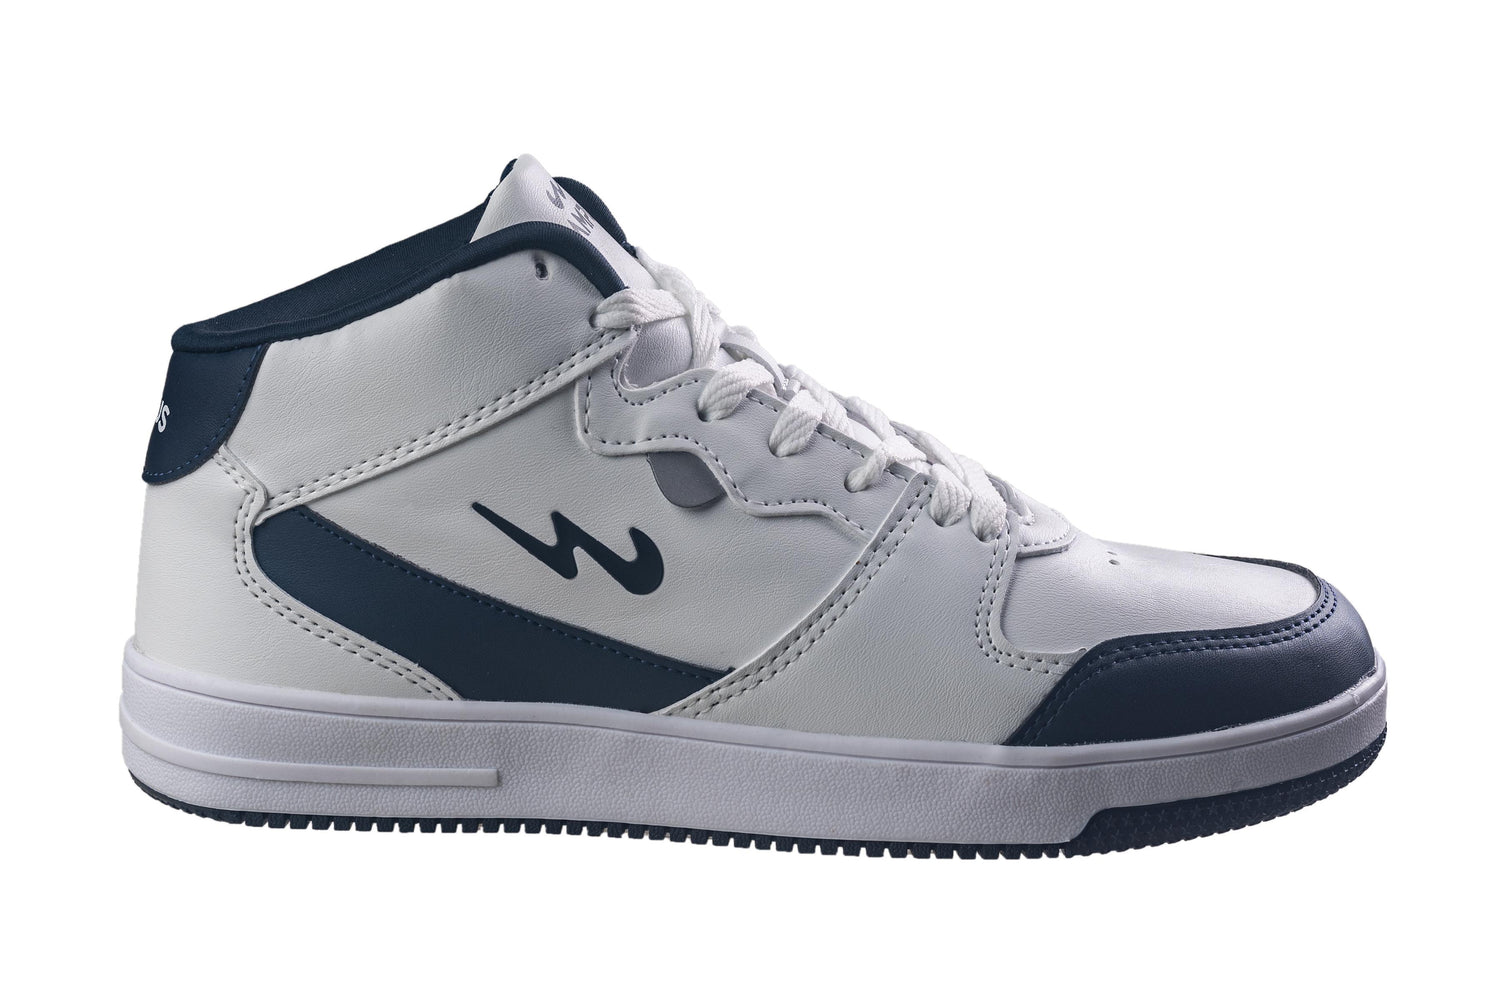 Campus Gents White / Navy Sports Shoe